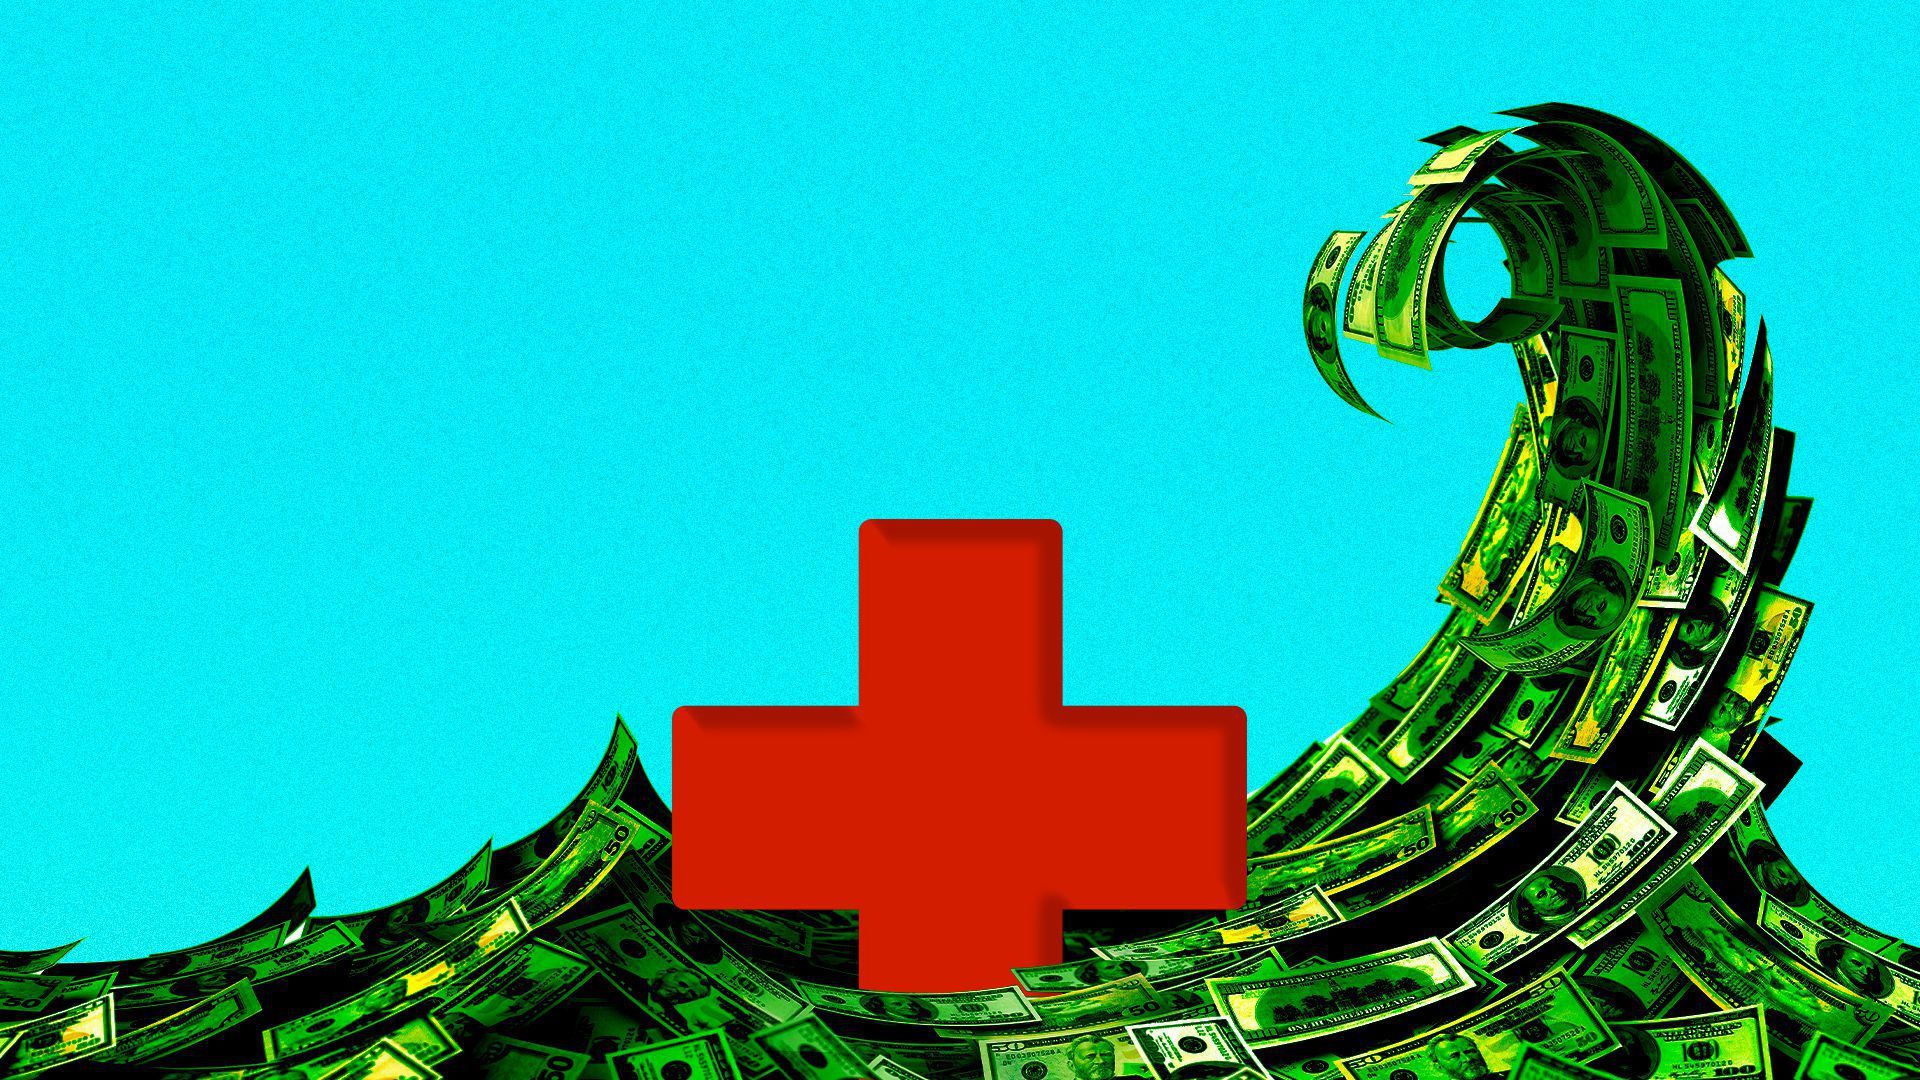 A wave of money consuming a medical sign